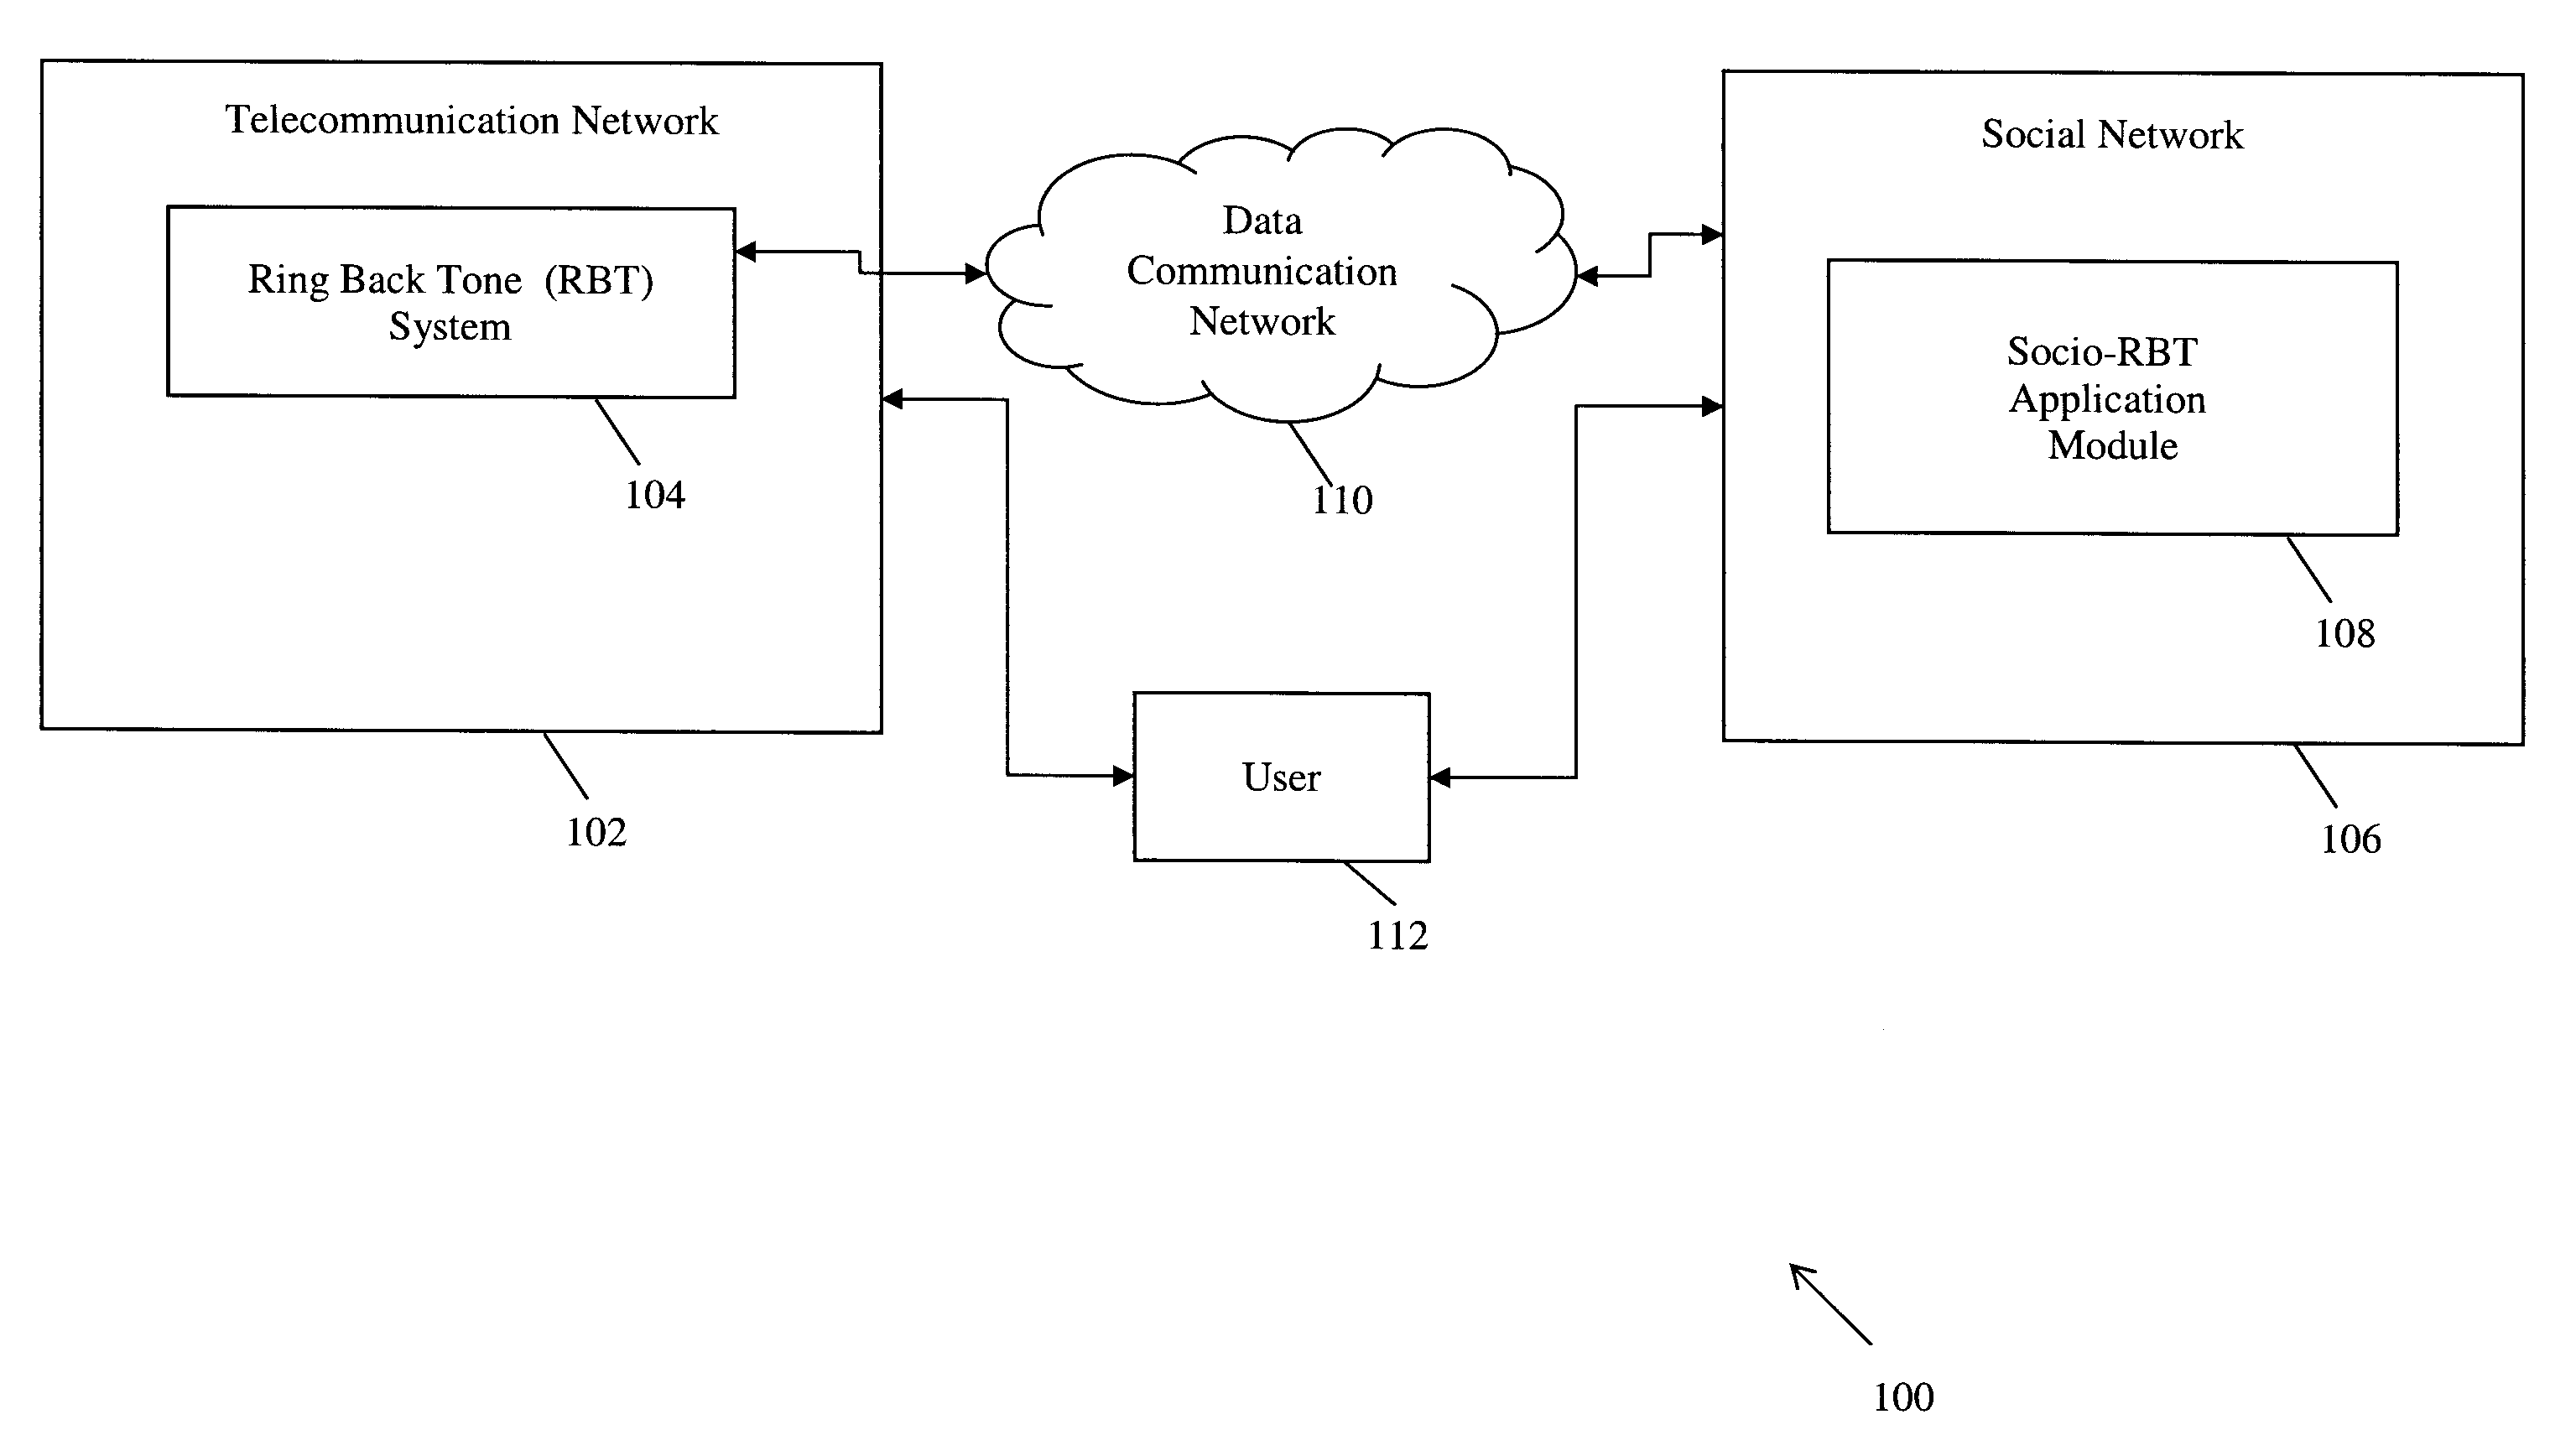 Method and system for updating social networking site with ring back tone information